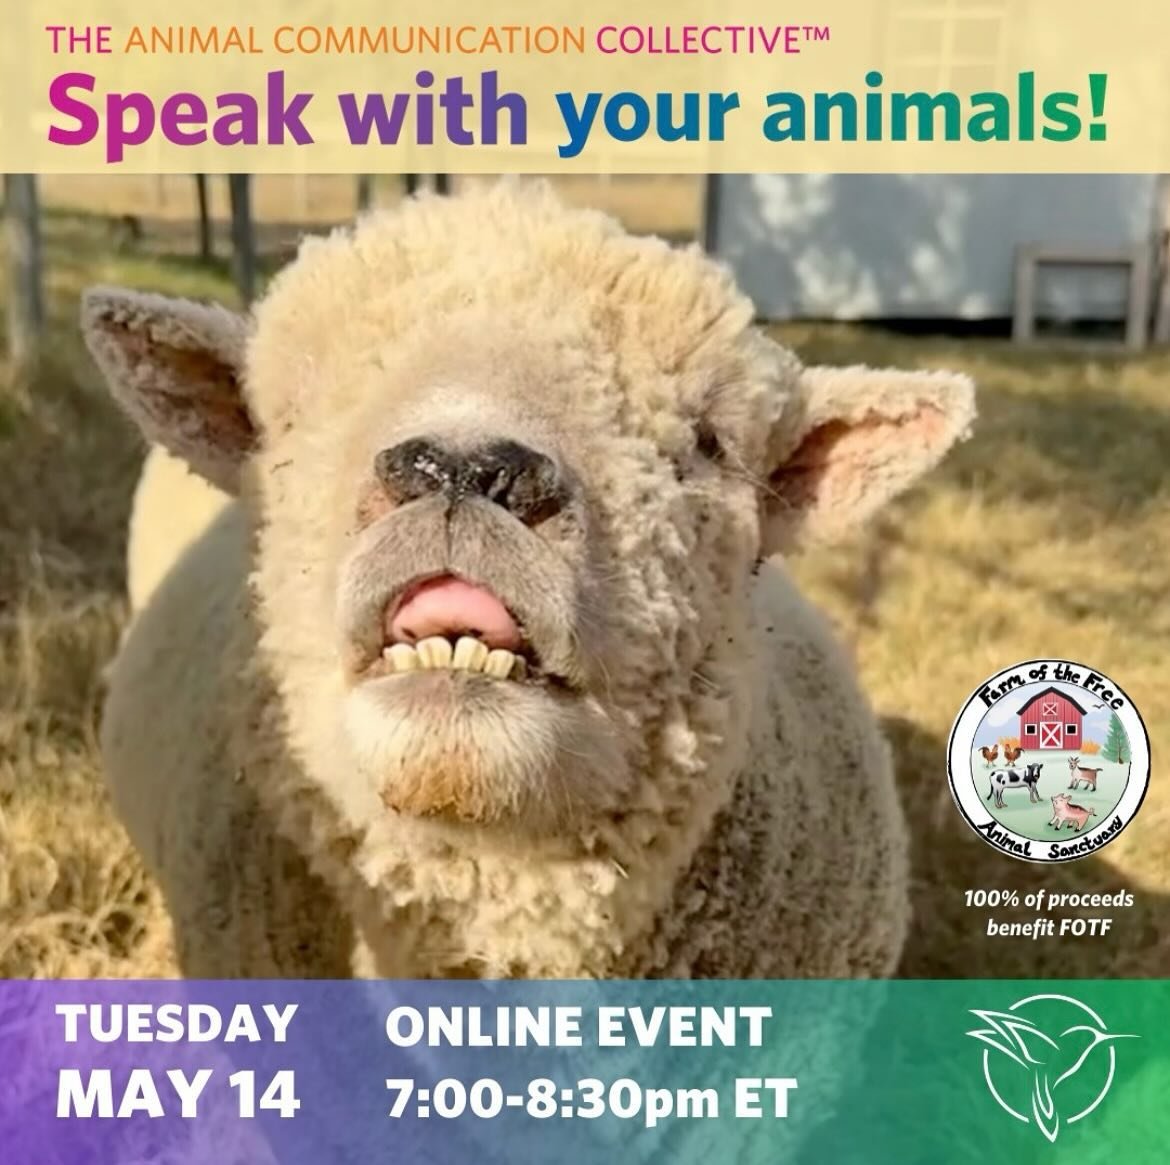 Dive into the enchanting world of animal communication with Farm of the Free Animal Sanctuary! Join FOTF for a virtual event on Tuesday, May 14 in collaboration with @animalcommunicationcollective. Meet professional animal communicators Karen, Meredi